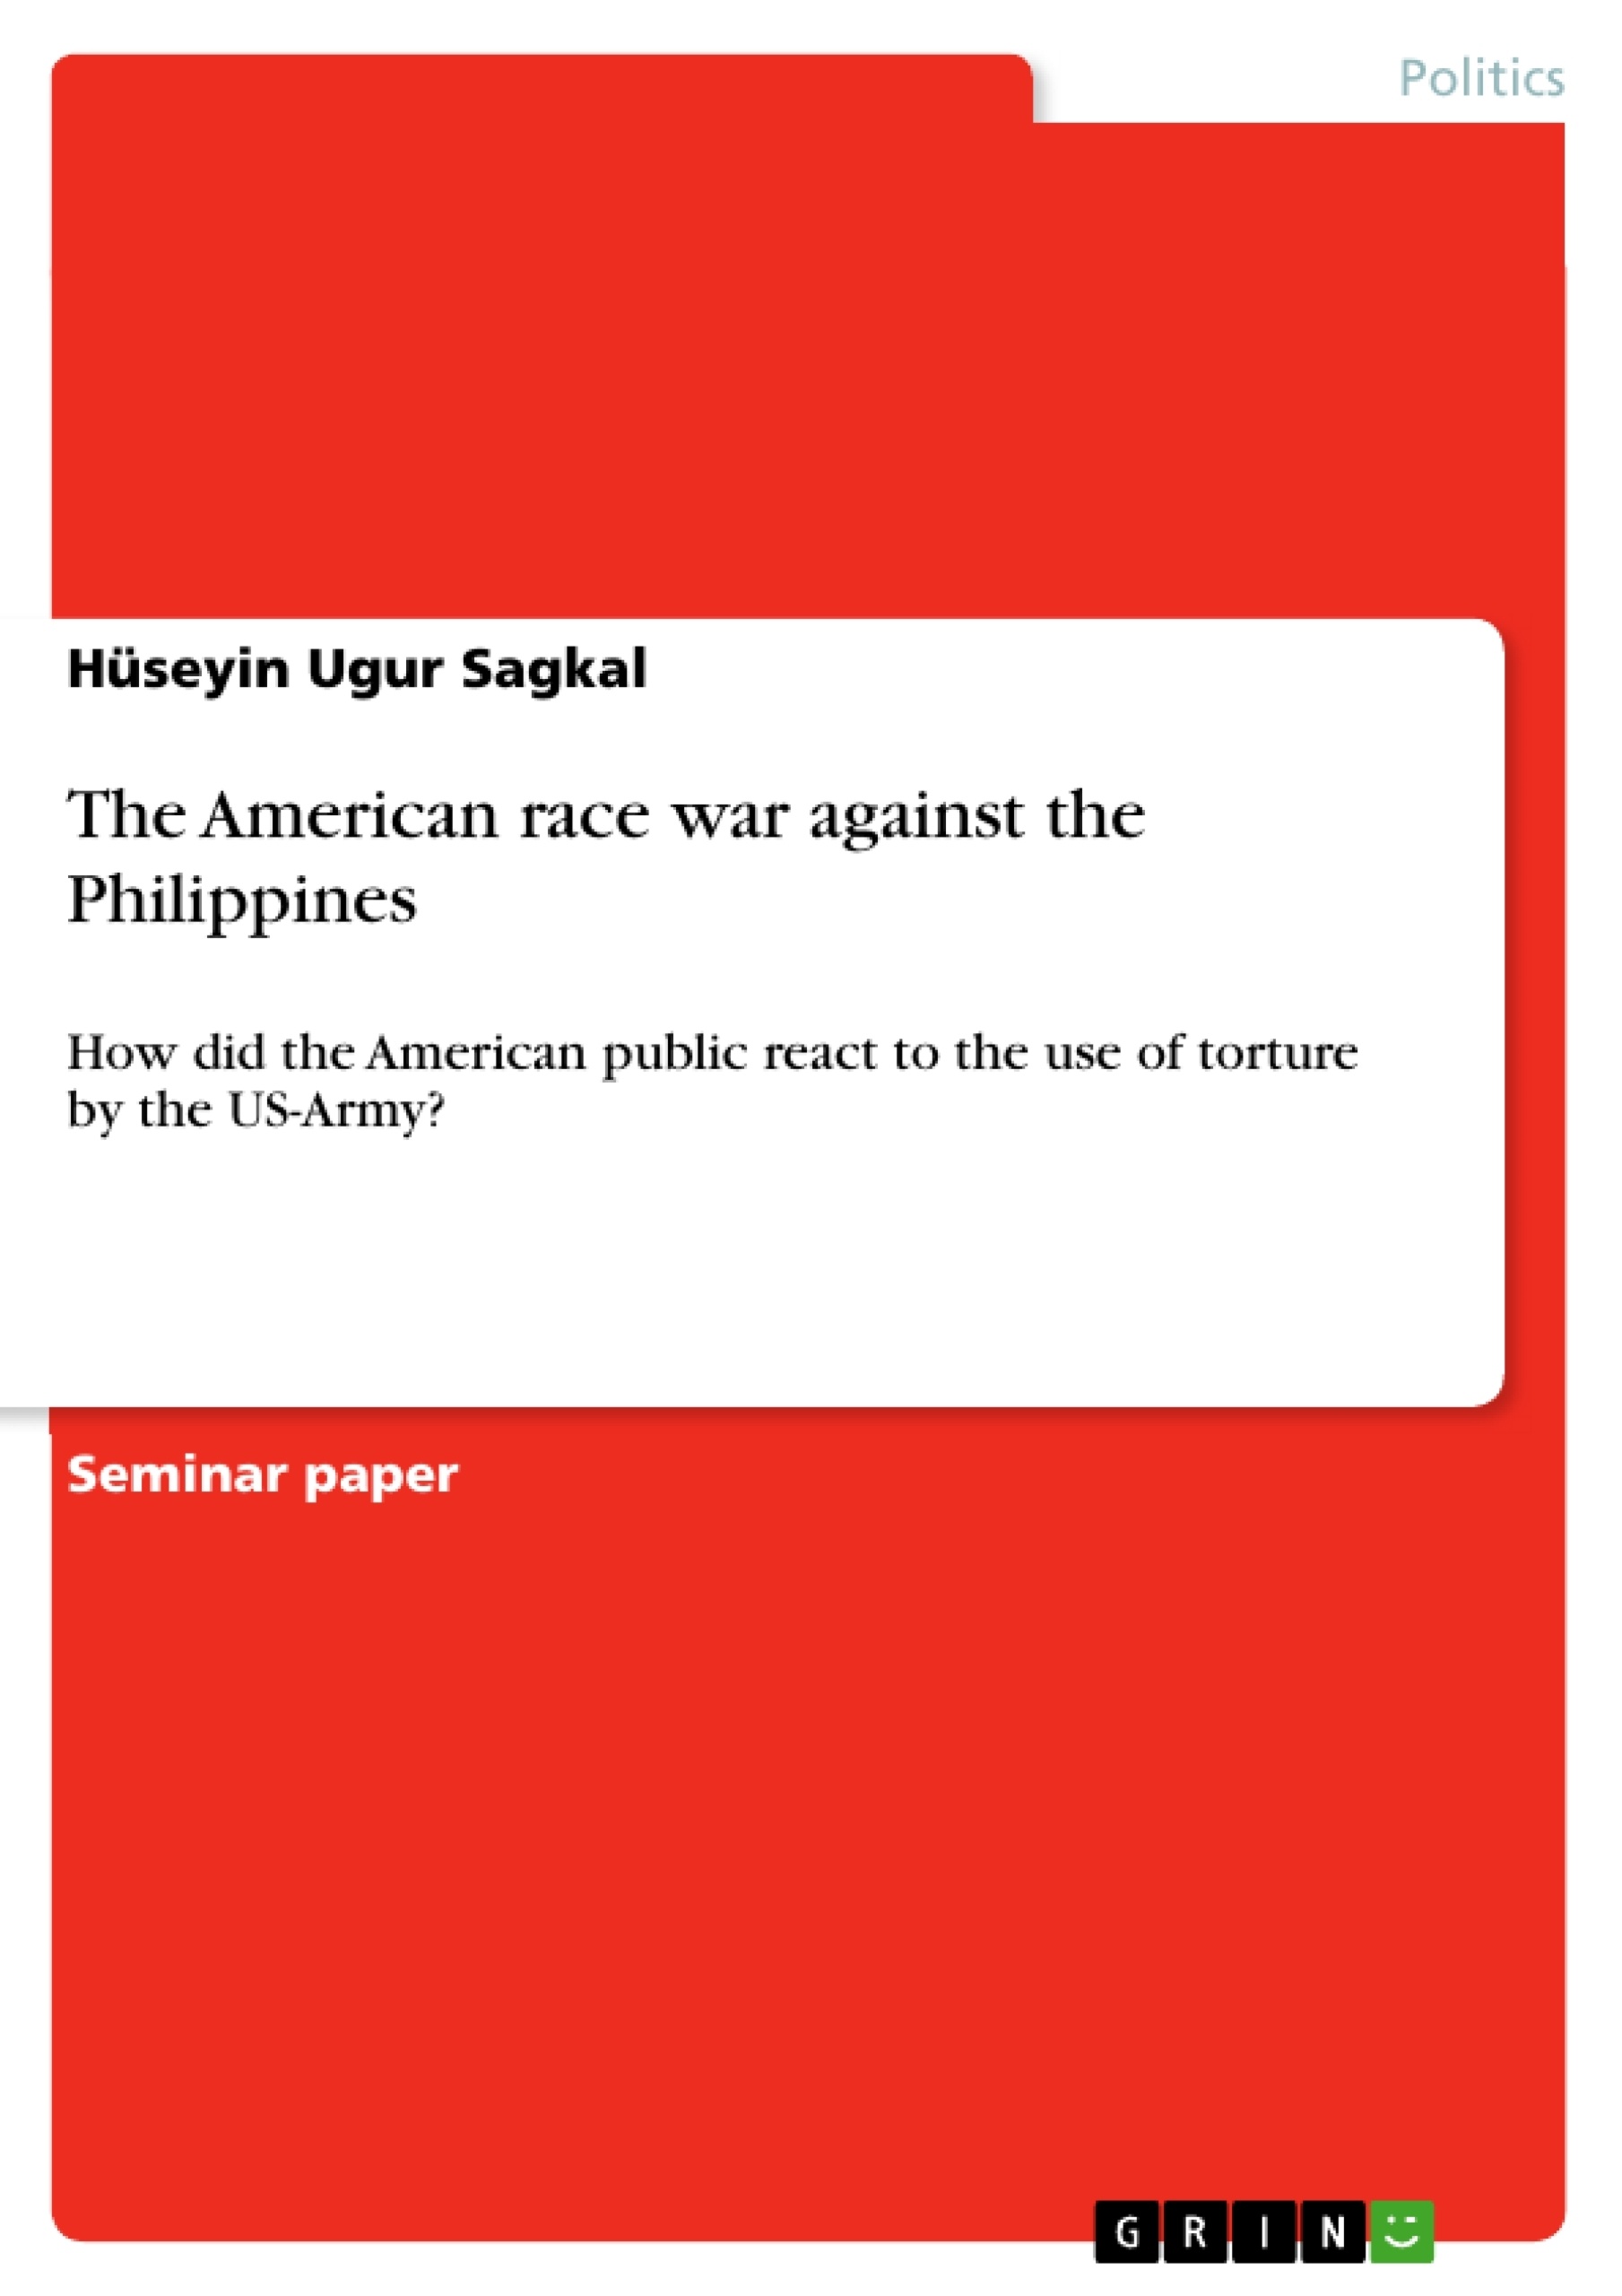 Title: The American race war against the Philippines